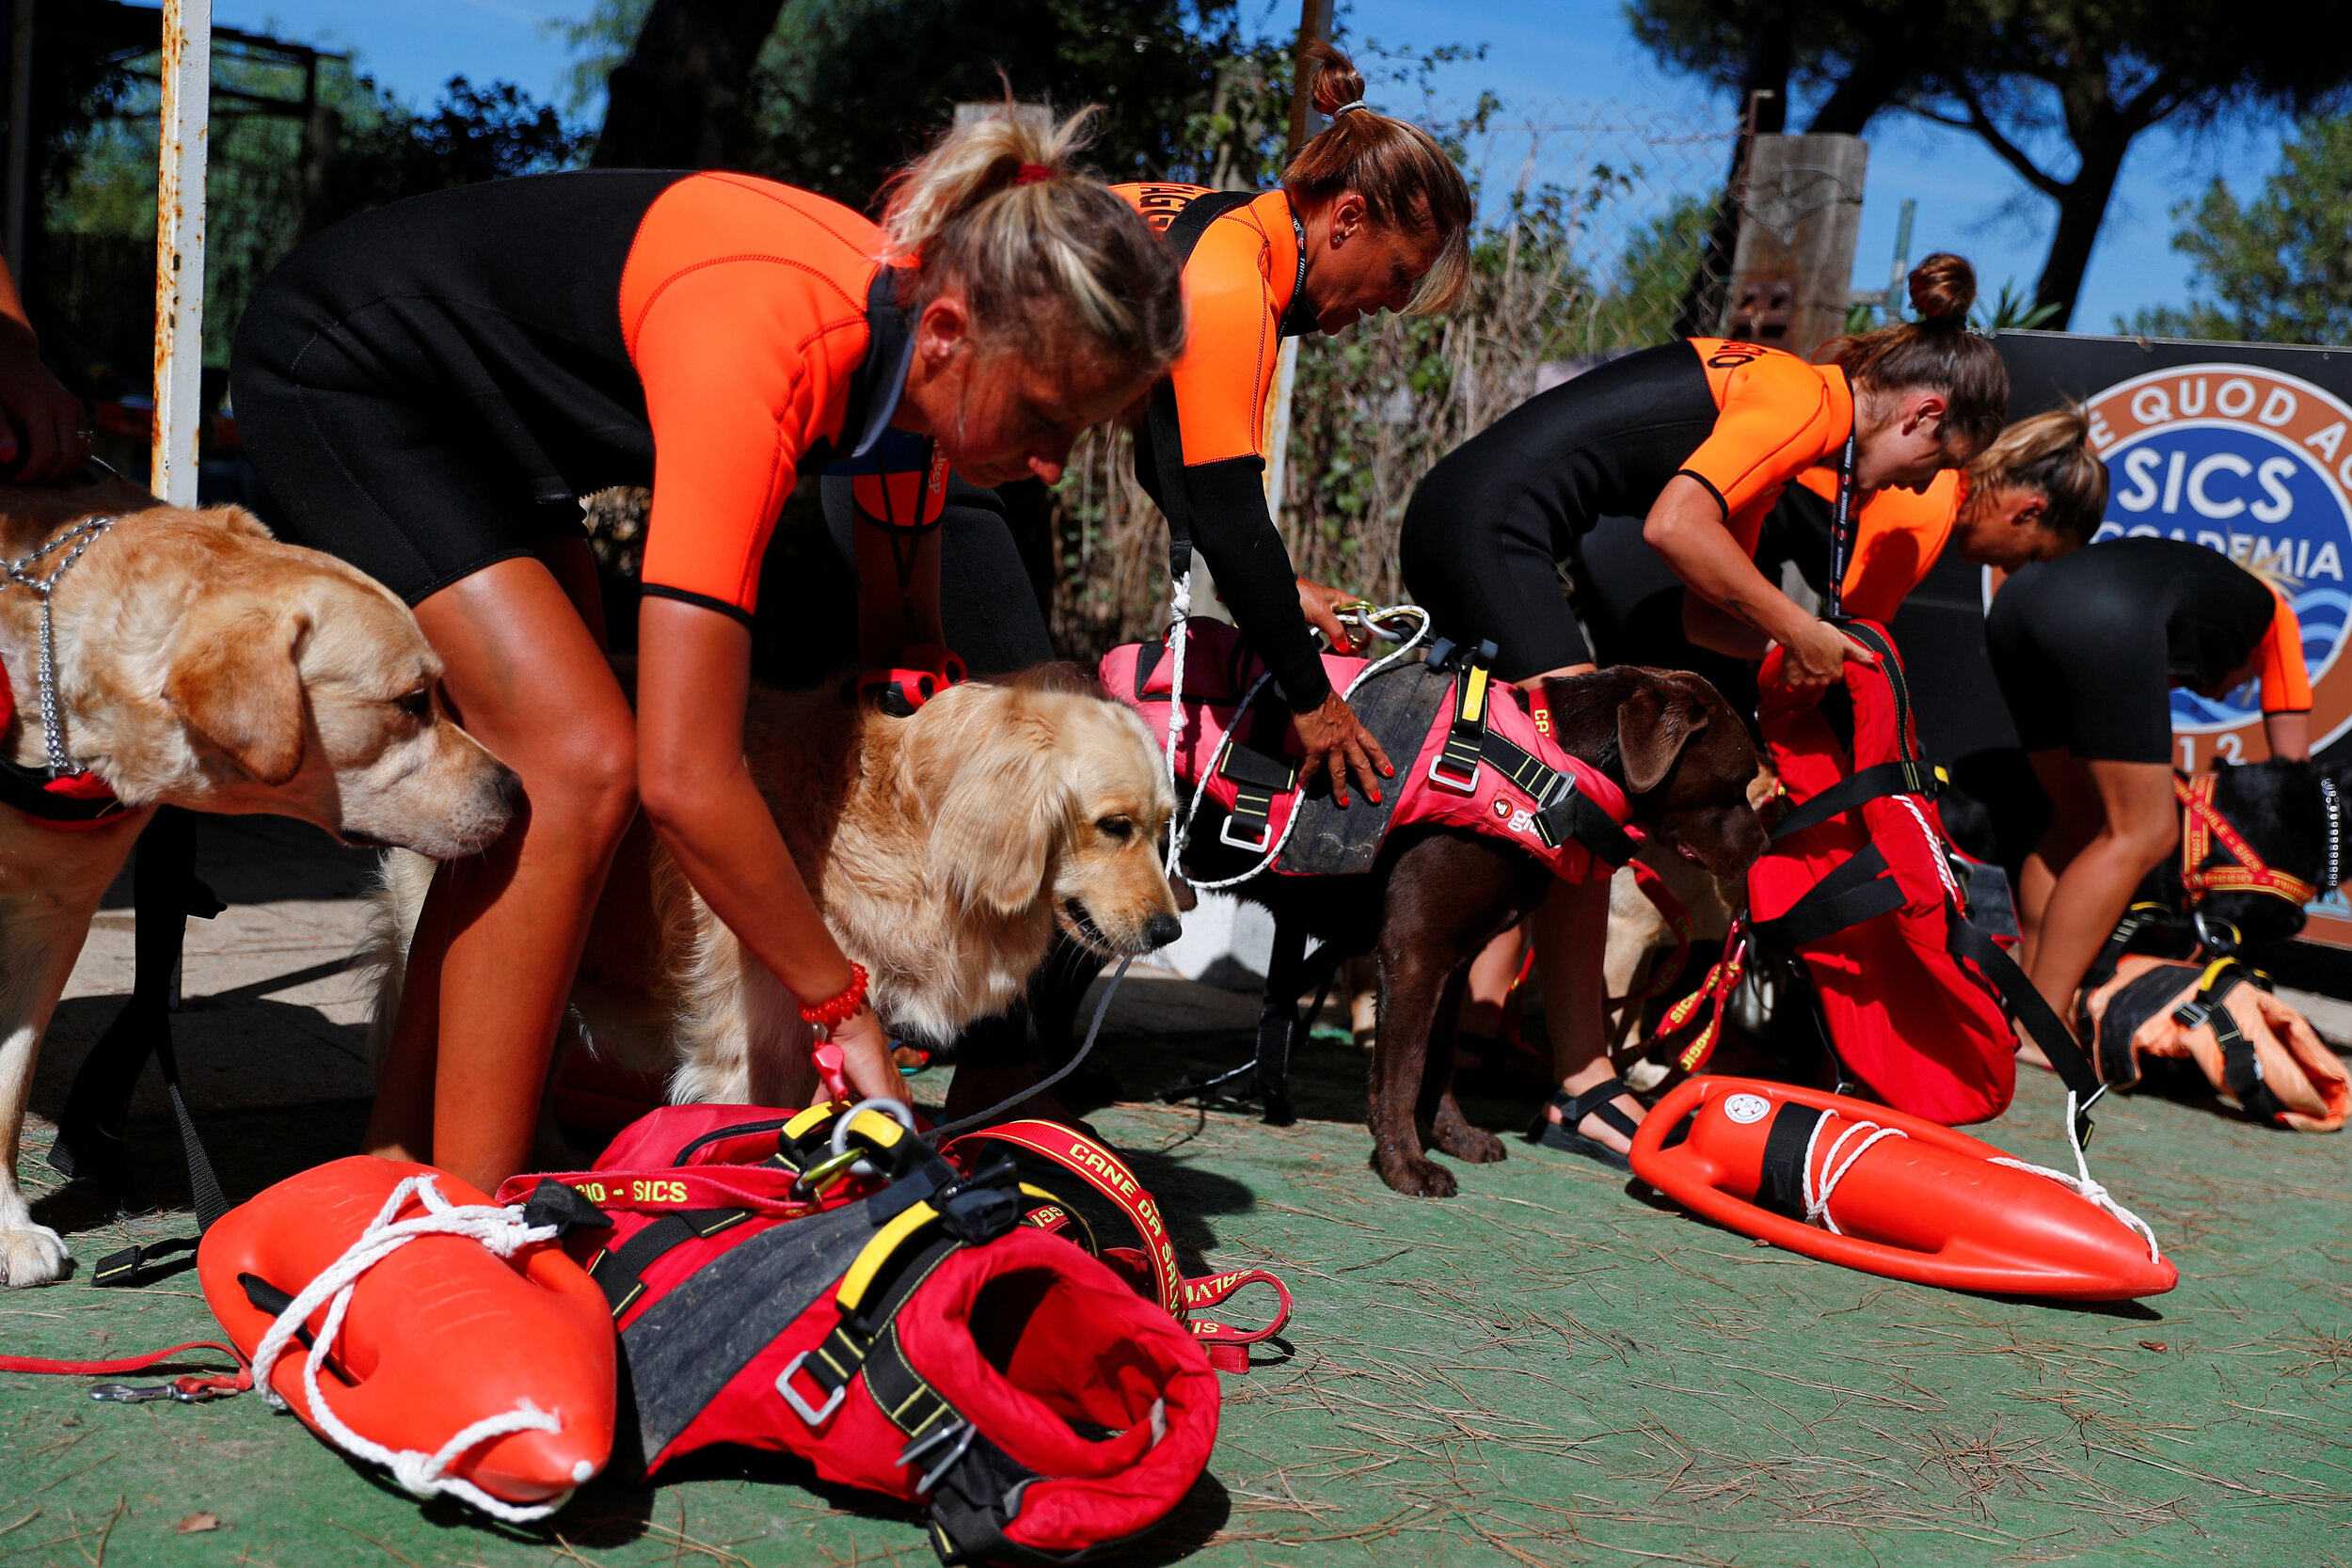  Members of an all-female group of canine rescuers from the Italian School of Rescue Dogs (La Scuola Italiana Cani Salvataggio) get ready to attend a training session with their dogs before patrolling the beach to ensure swimmers can enjoy their time